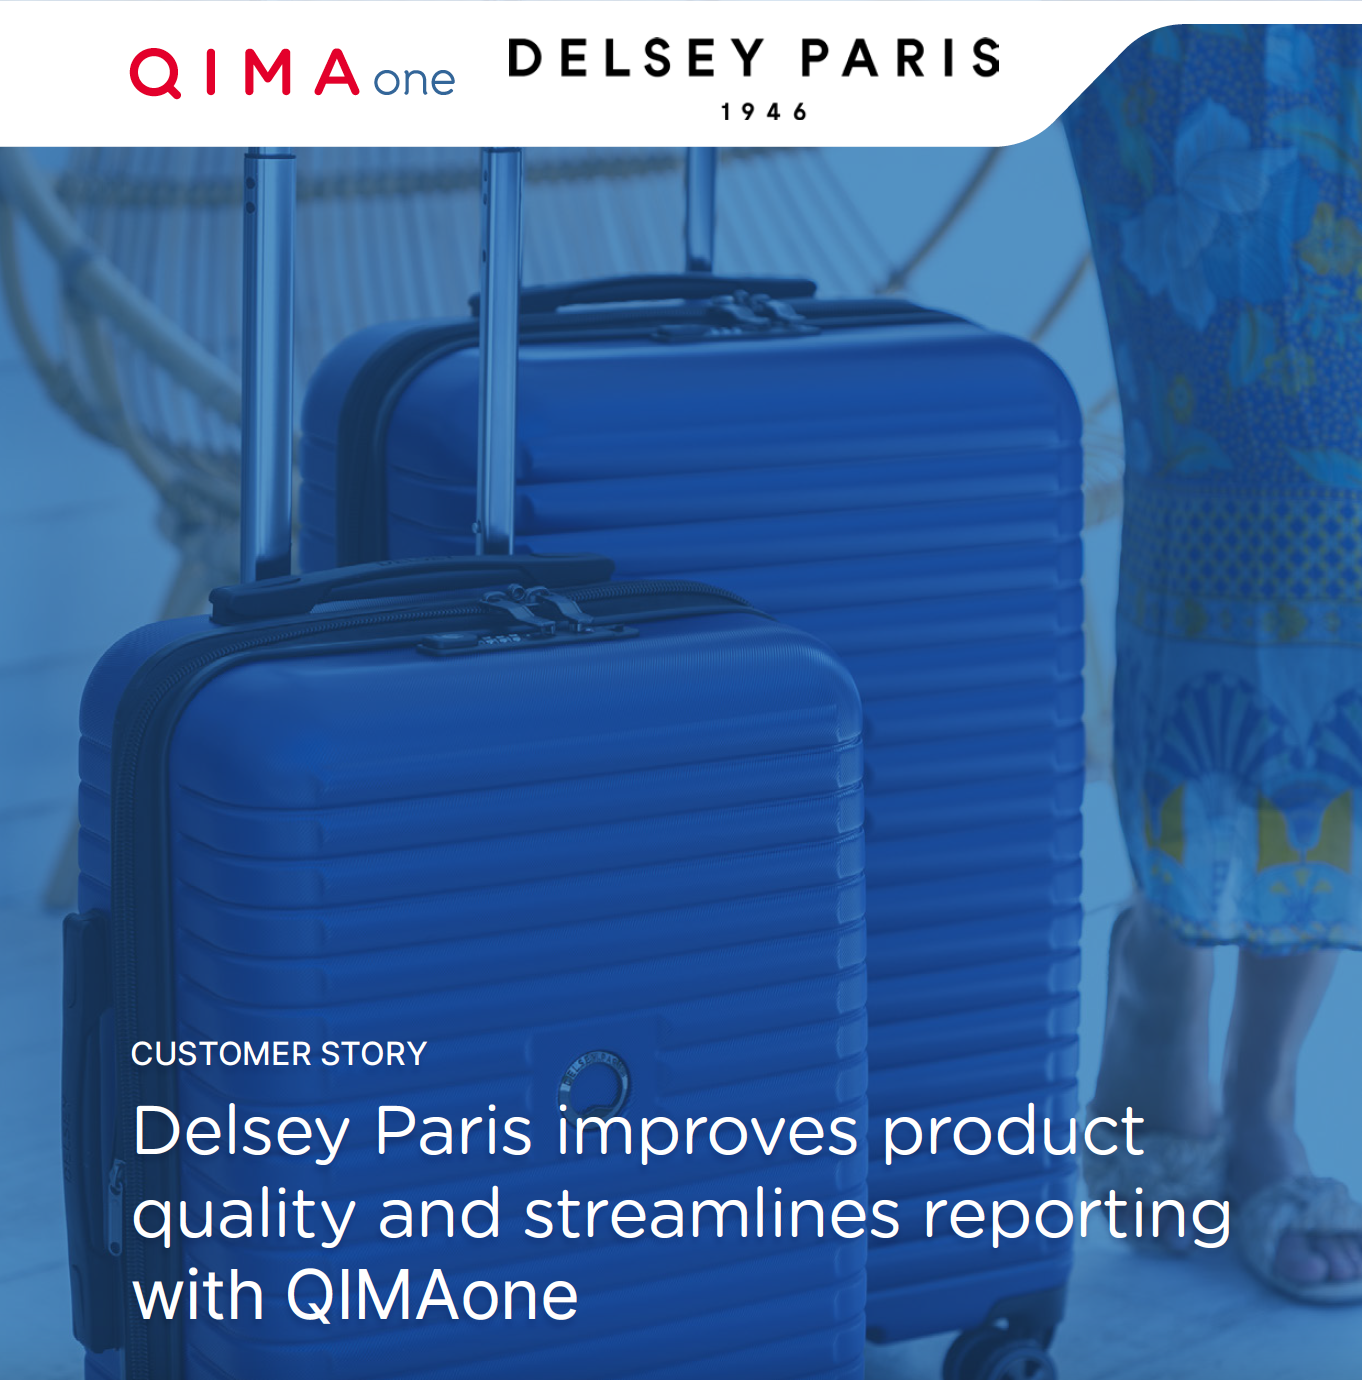 Delsey Paris improves product quality and streamlines reporting with QIMAone